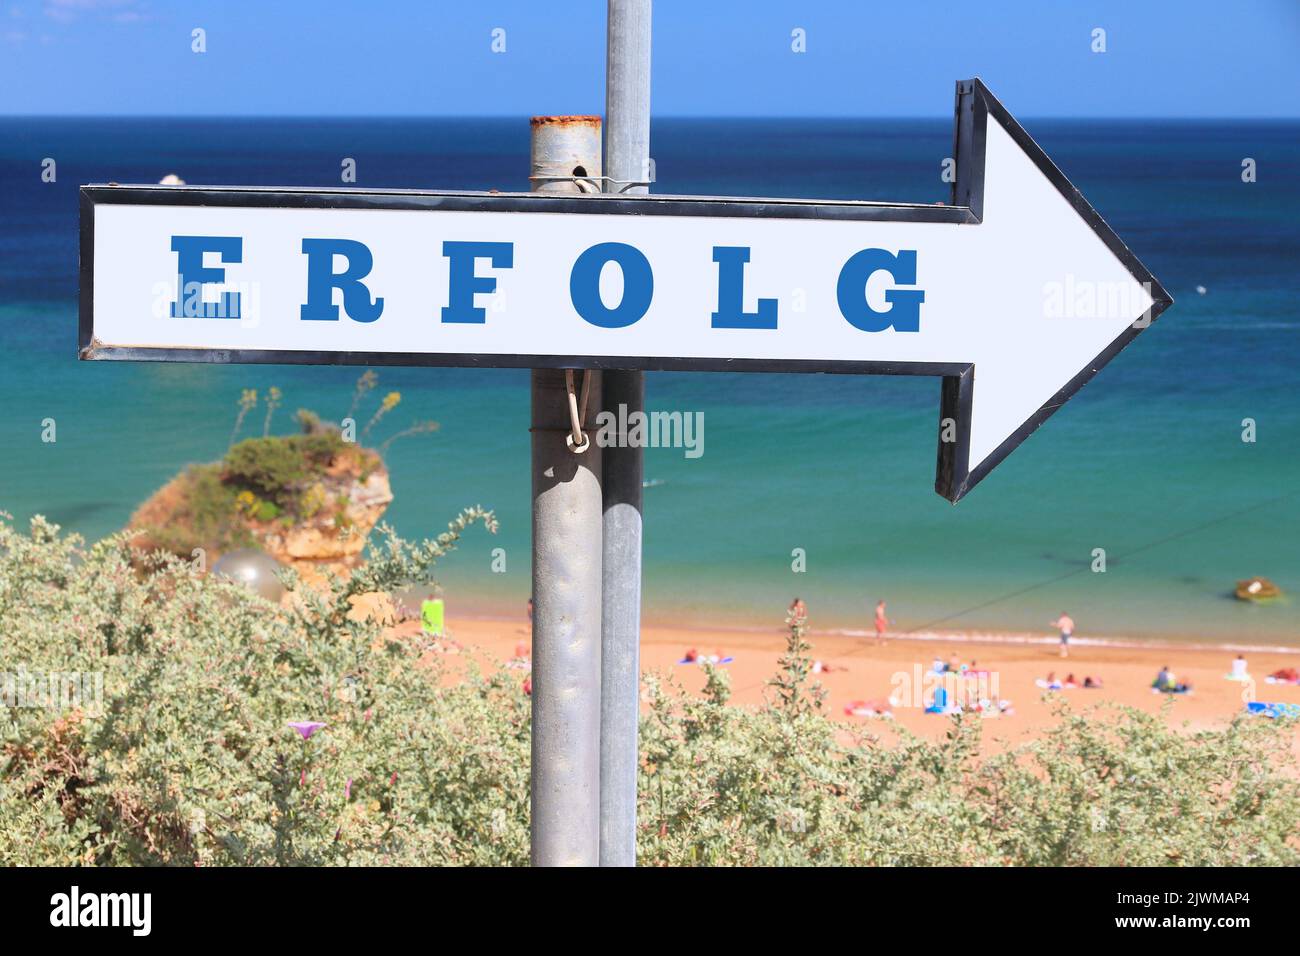 Erfolg - success word in German language. Beach sign text. Stock Photo